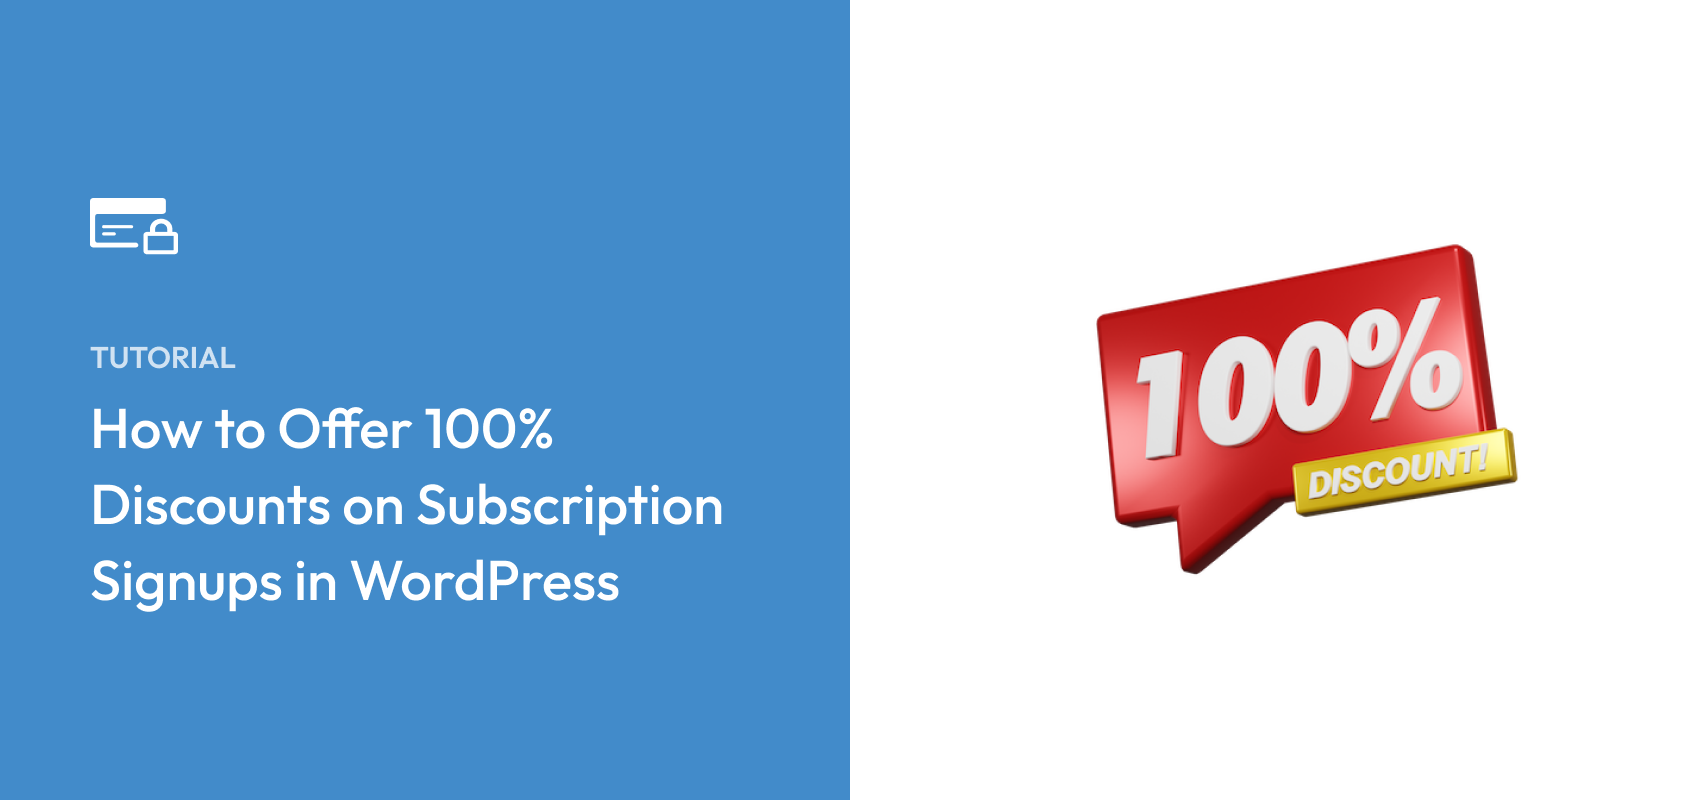 How to Offer 100% Discounts on Subscription Signups in WordPress